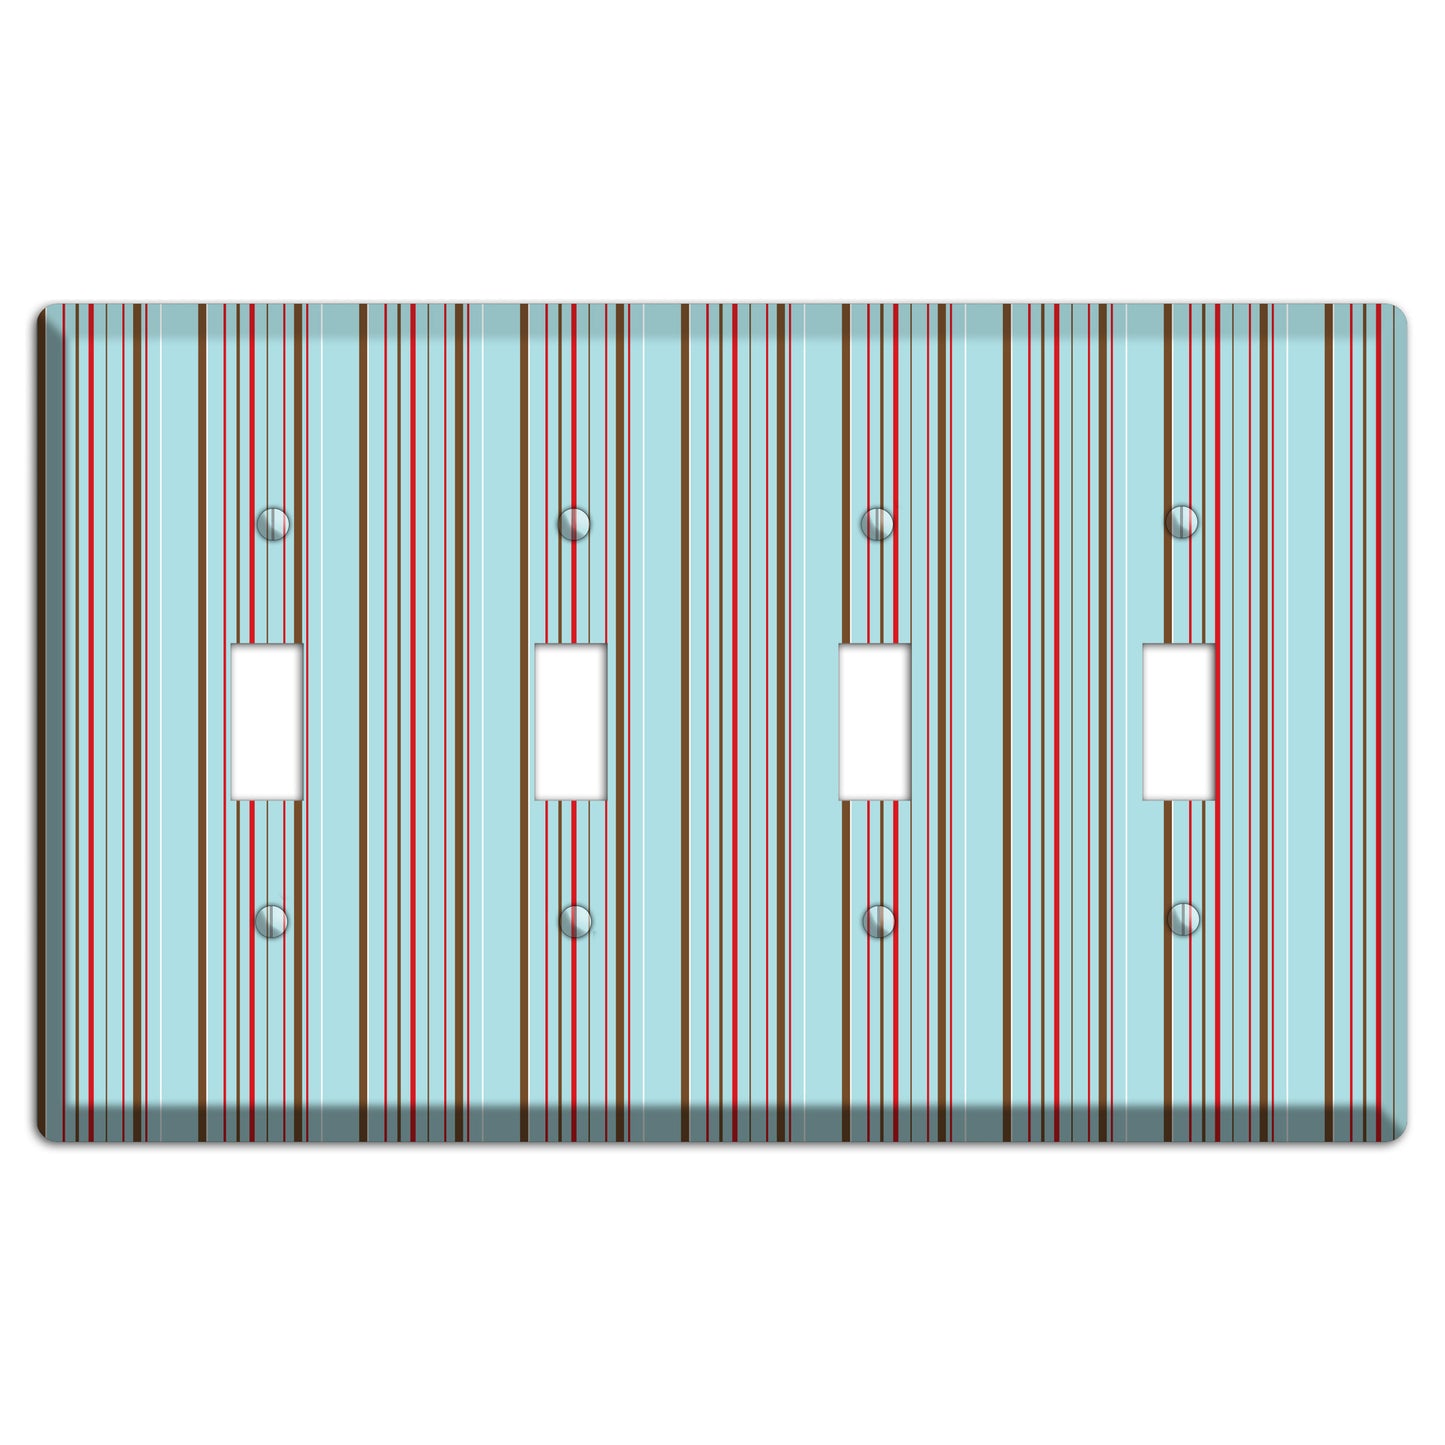 Dusty Blue with Red and Brown Vertical Stripes 4 Toggle Wallplate